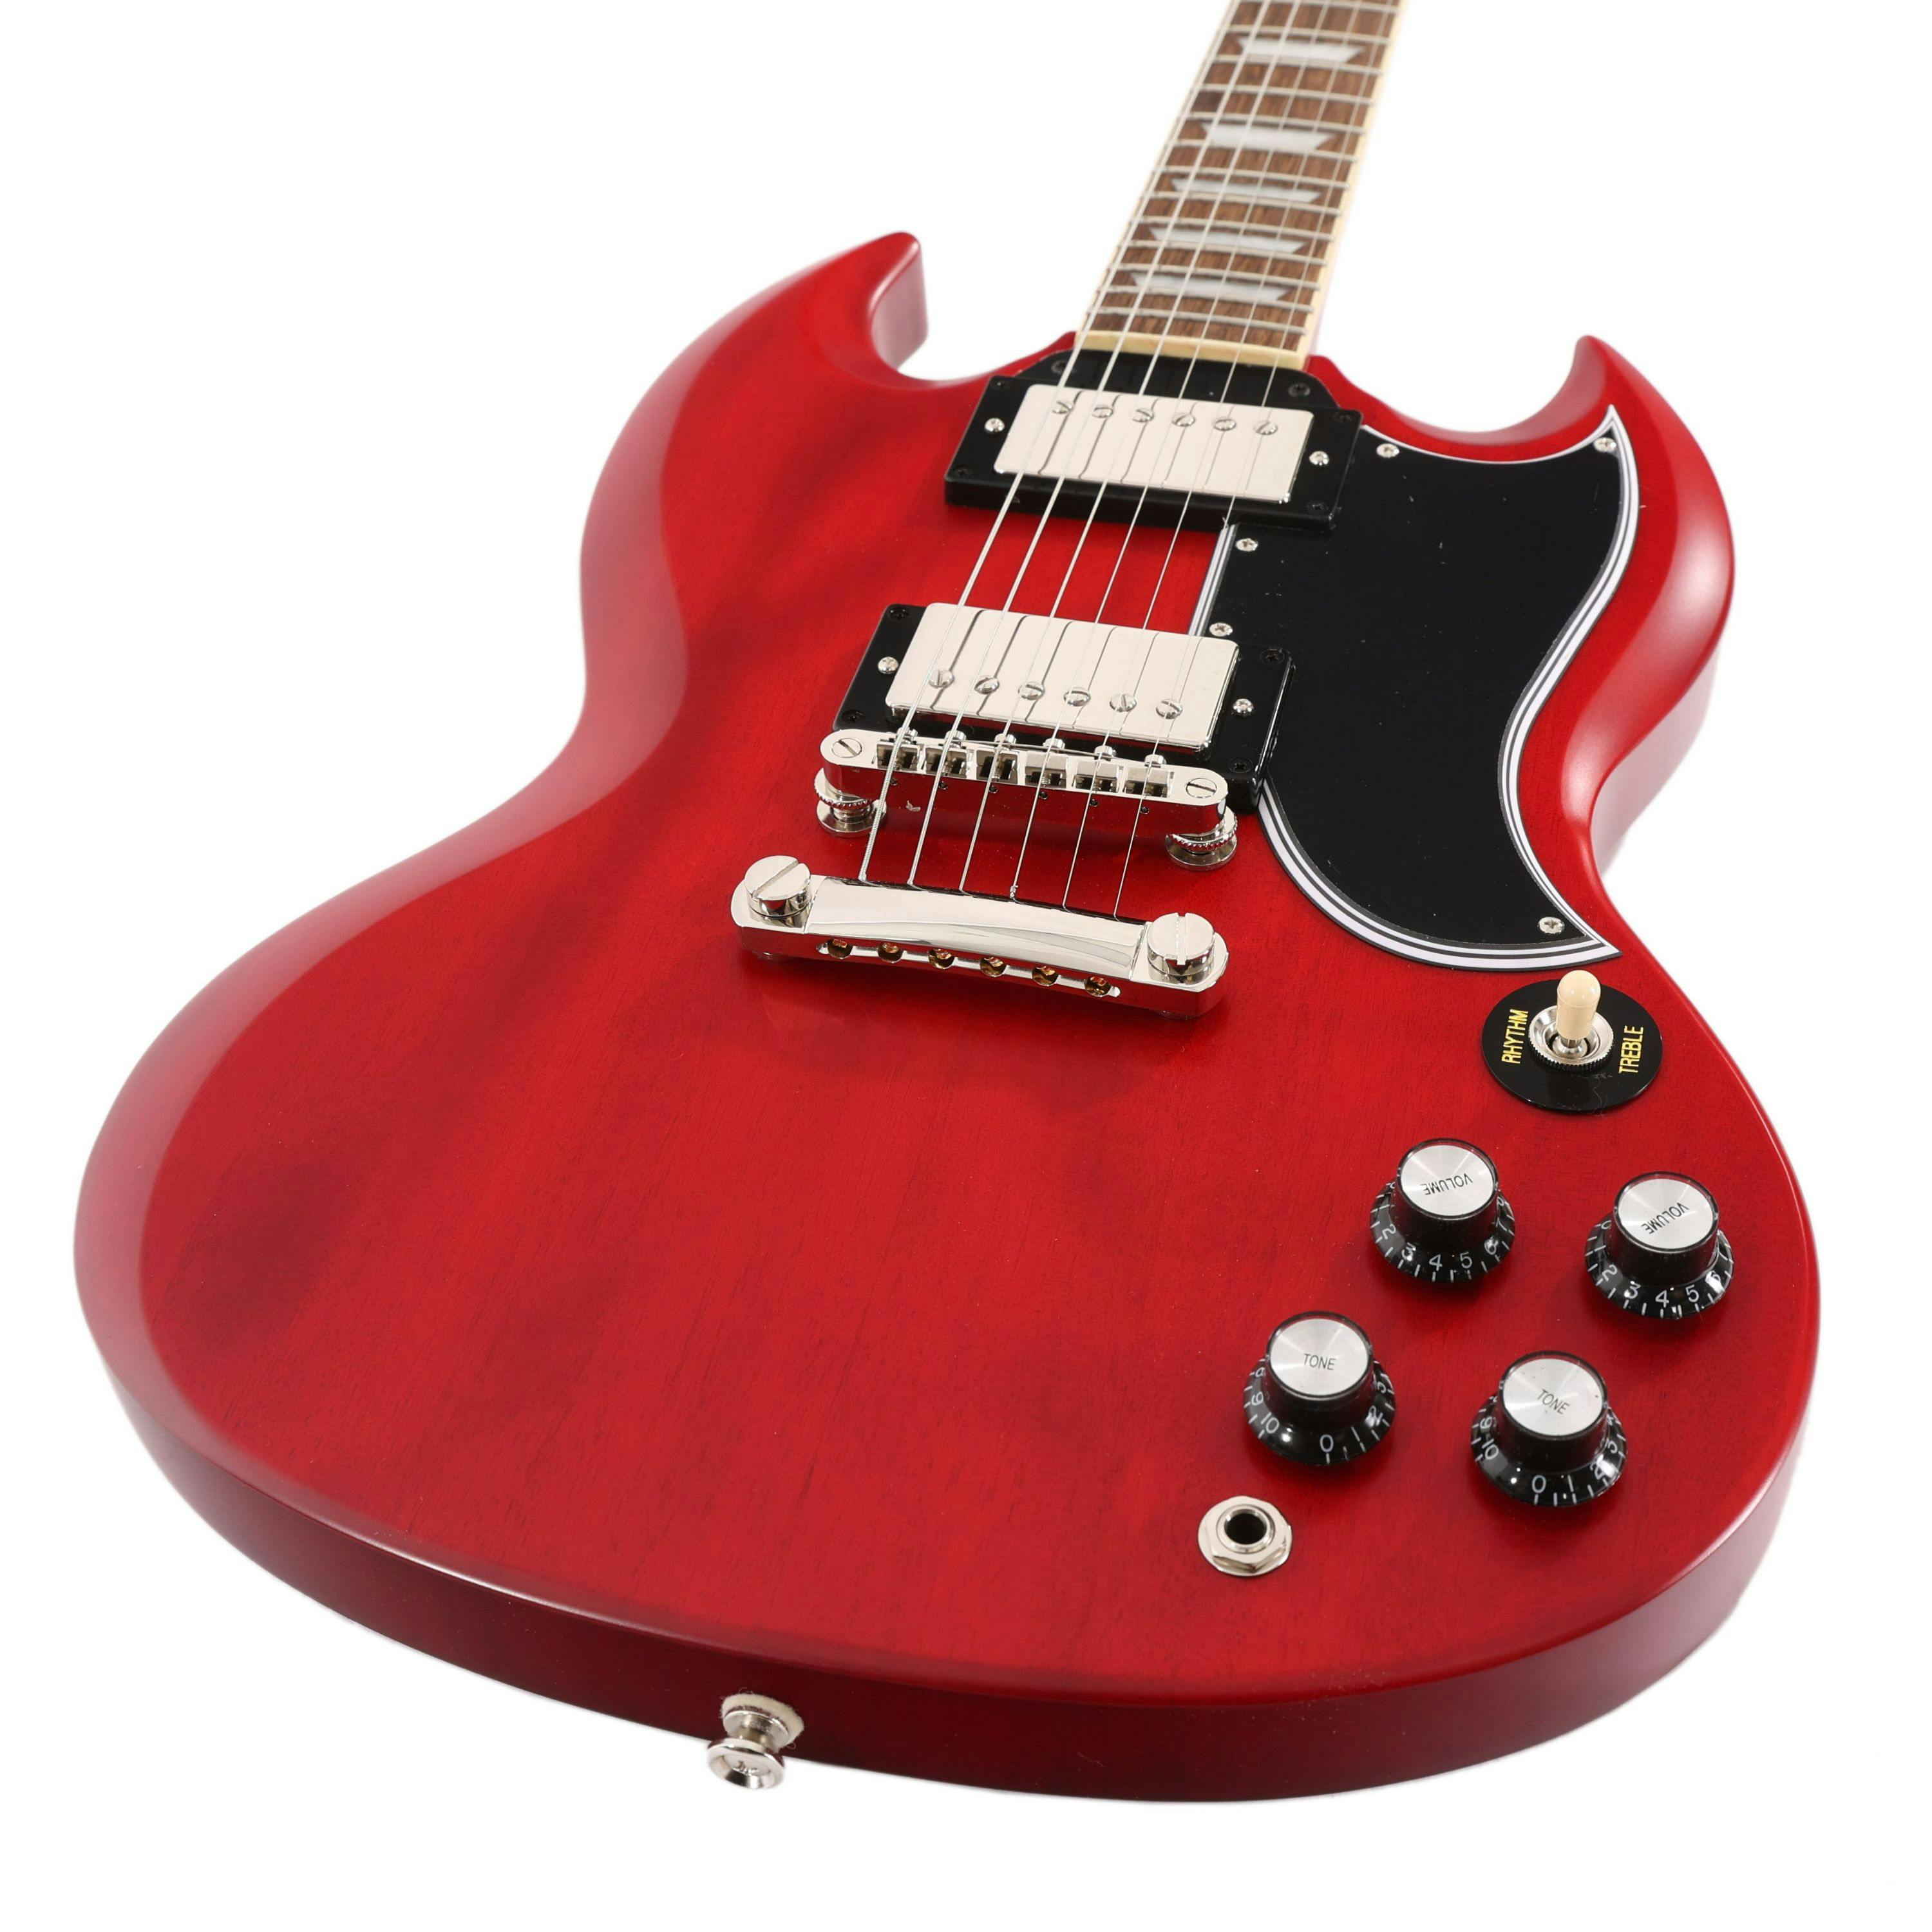 Epiphone 1961 Les Paul SG Standard Electric Guitar in Aged Sixties Cherry -  Andertons Music Co.